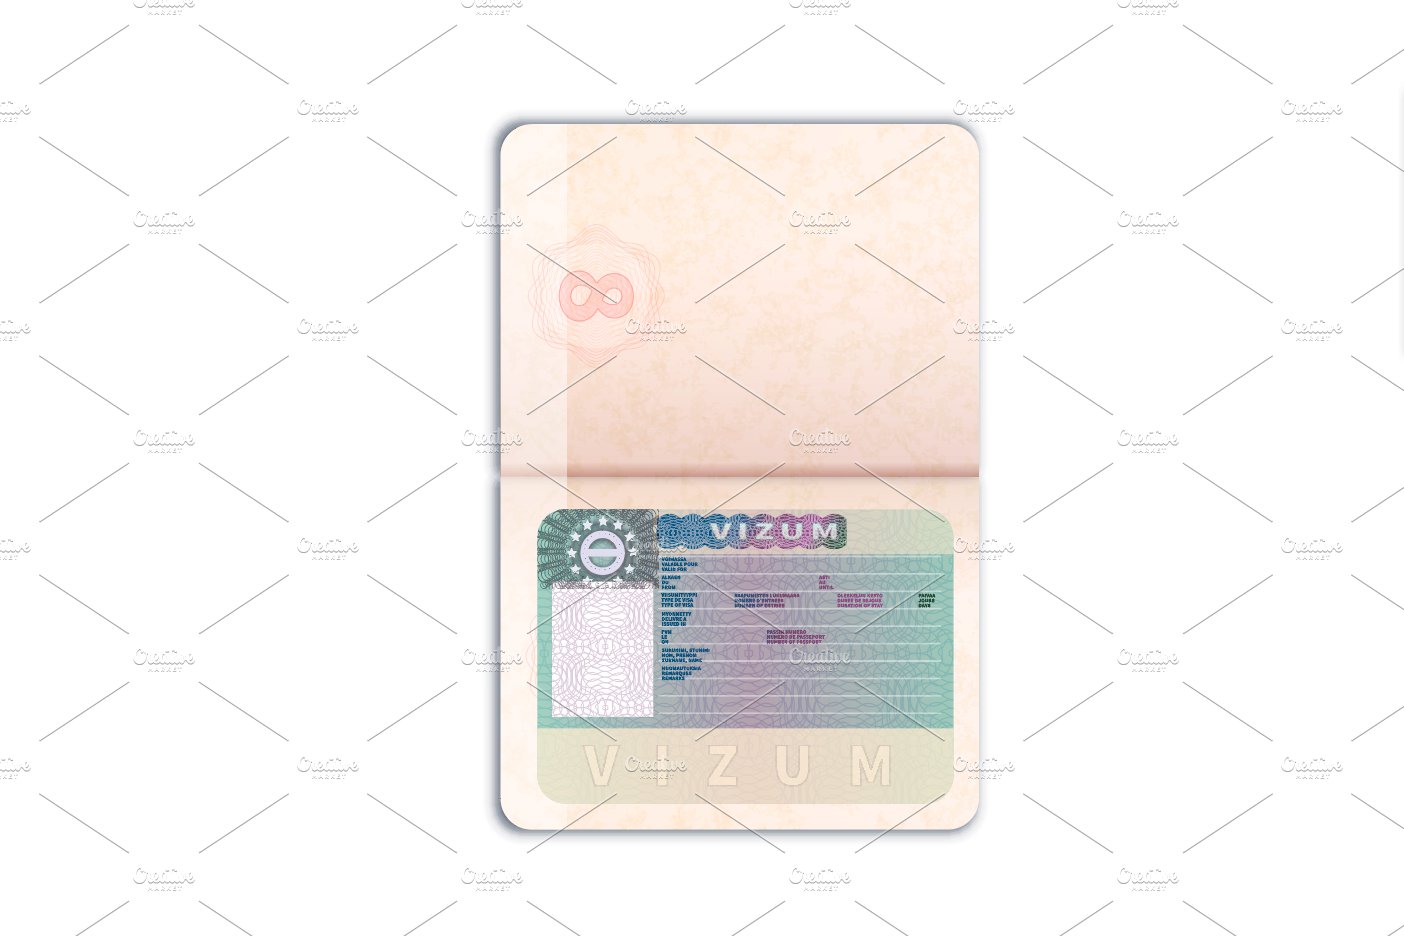 Open foreign passport with EU Visa cover image.